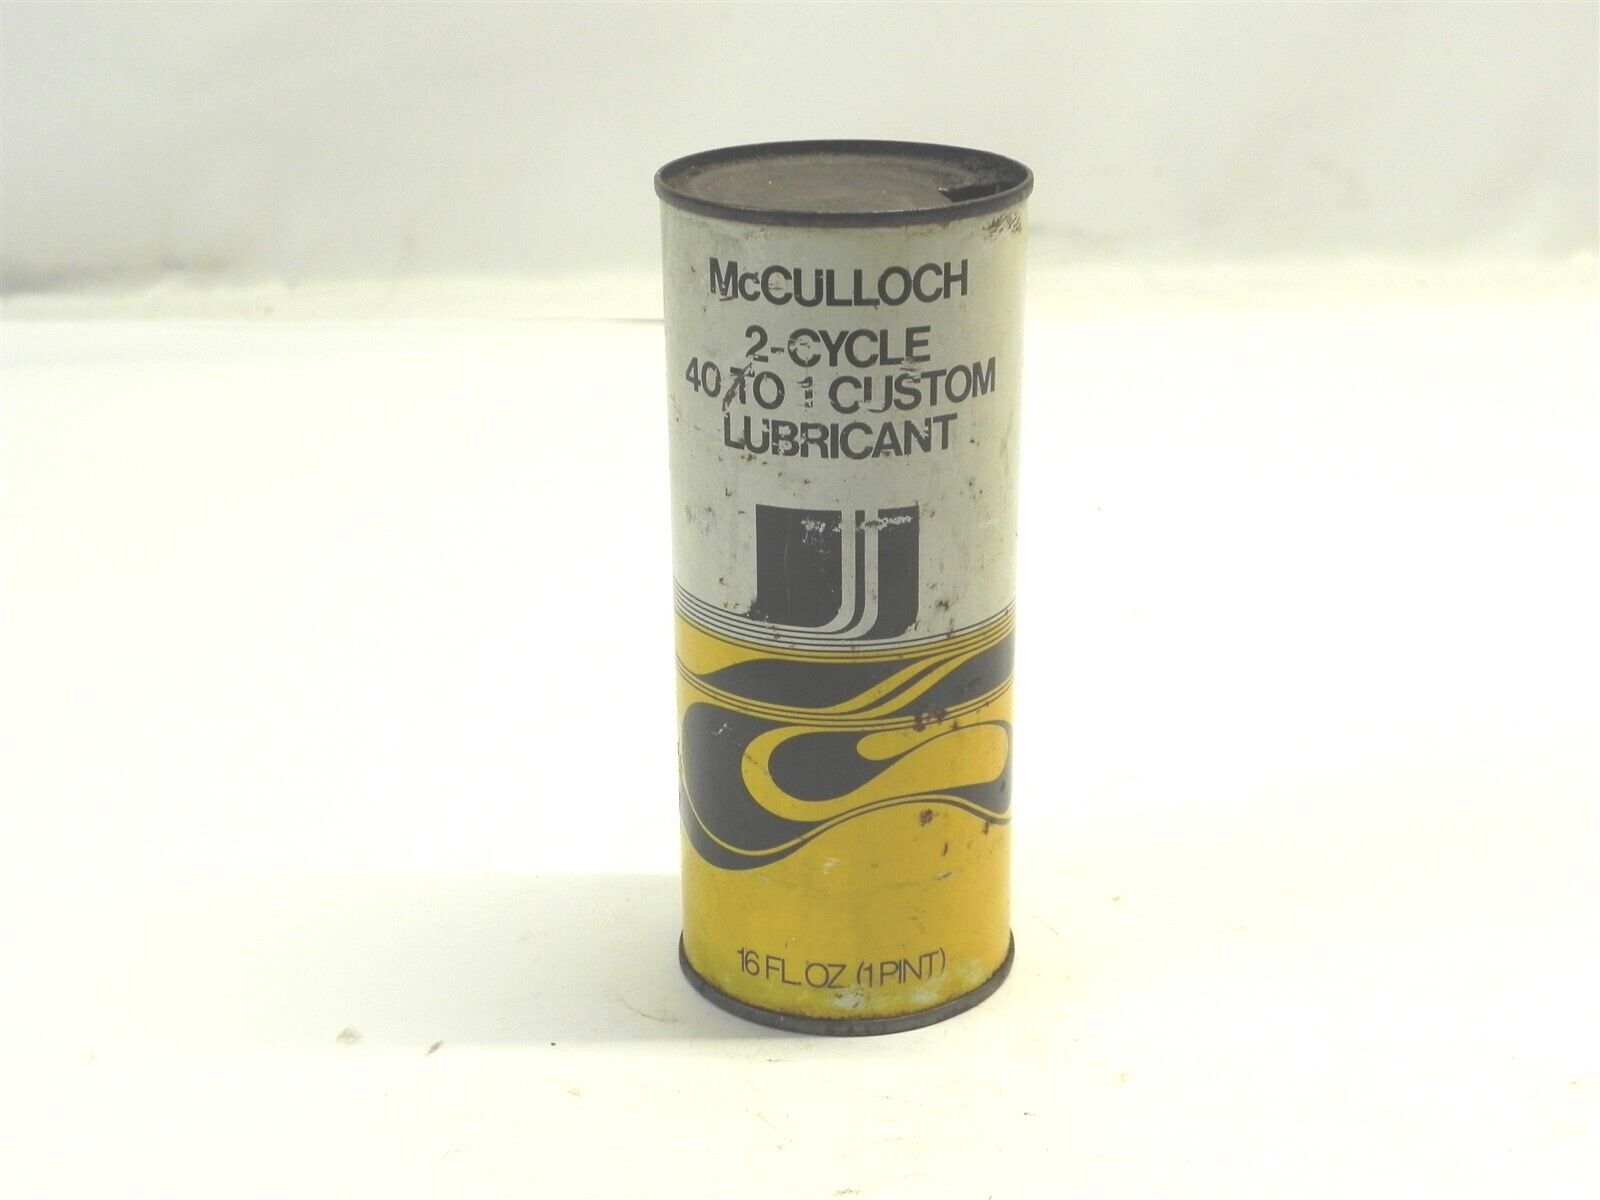 VINTAGE MCCULLOCH 2 CYCLE 40 TO 1 CUSTOM LUBRICANT CAN 16 FL OZ EMPTY PRE-OWNED 